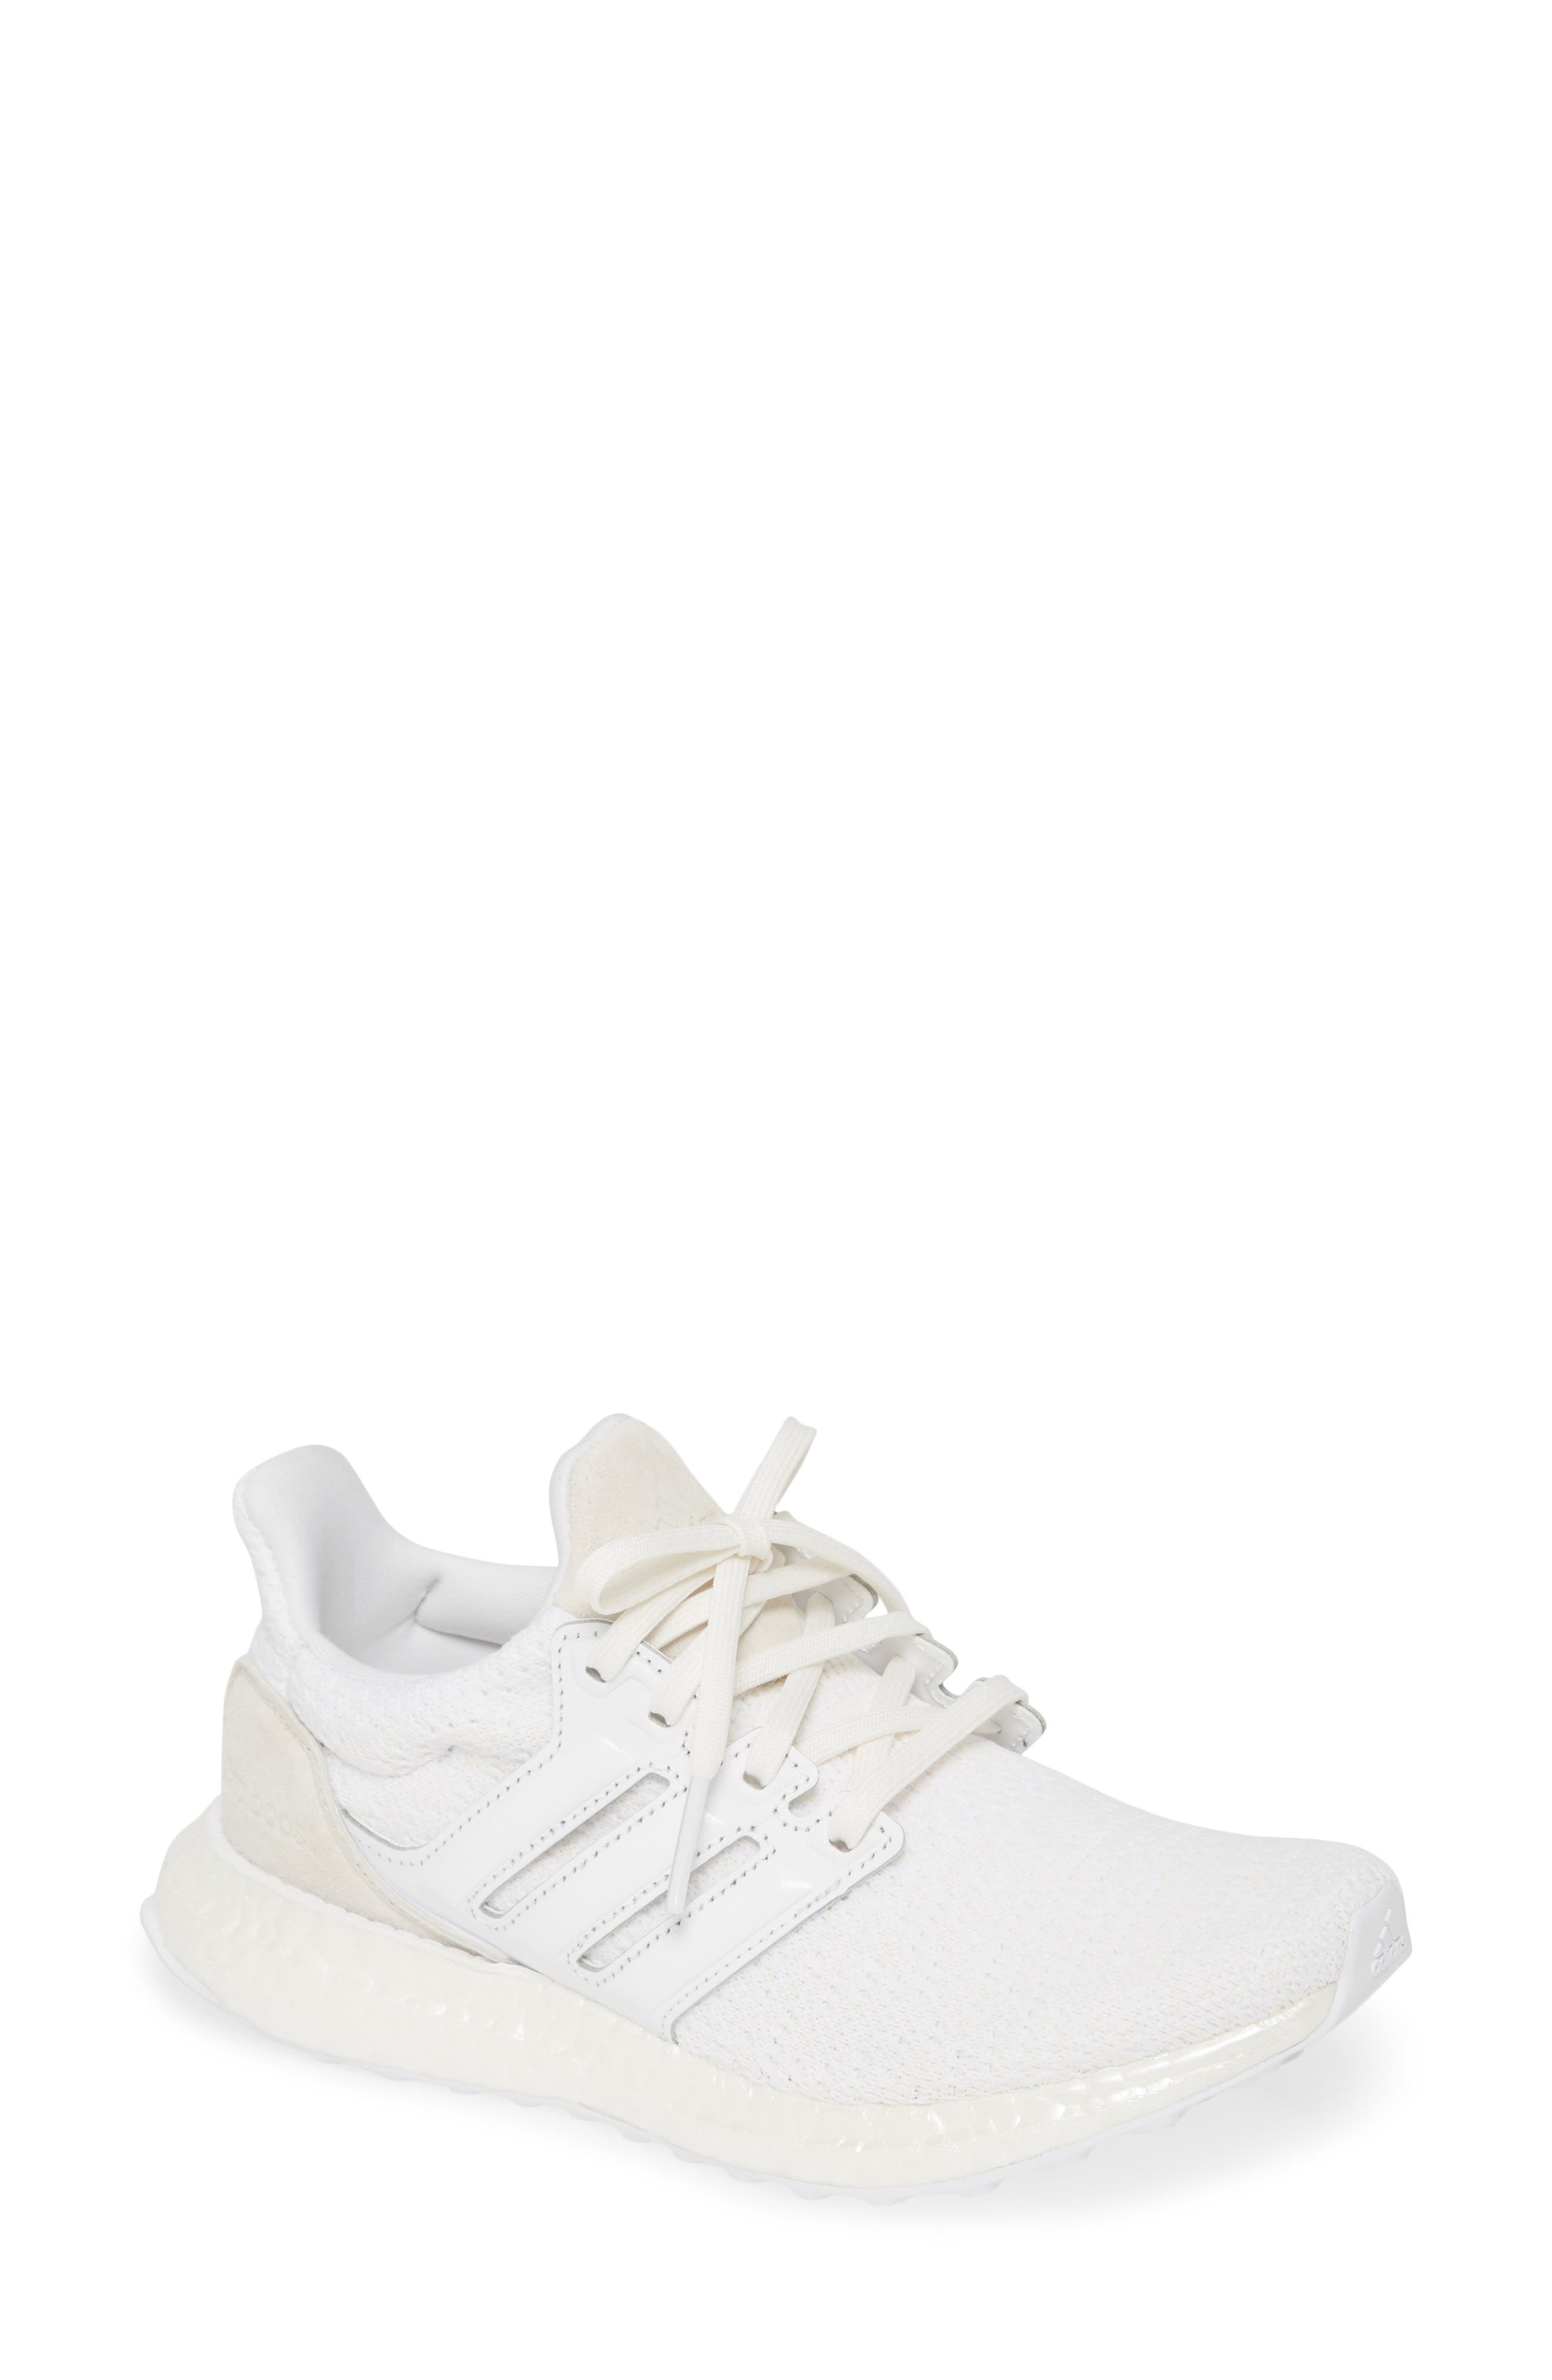 adidas womens shoes nordstrom